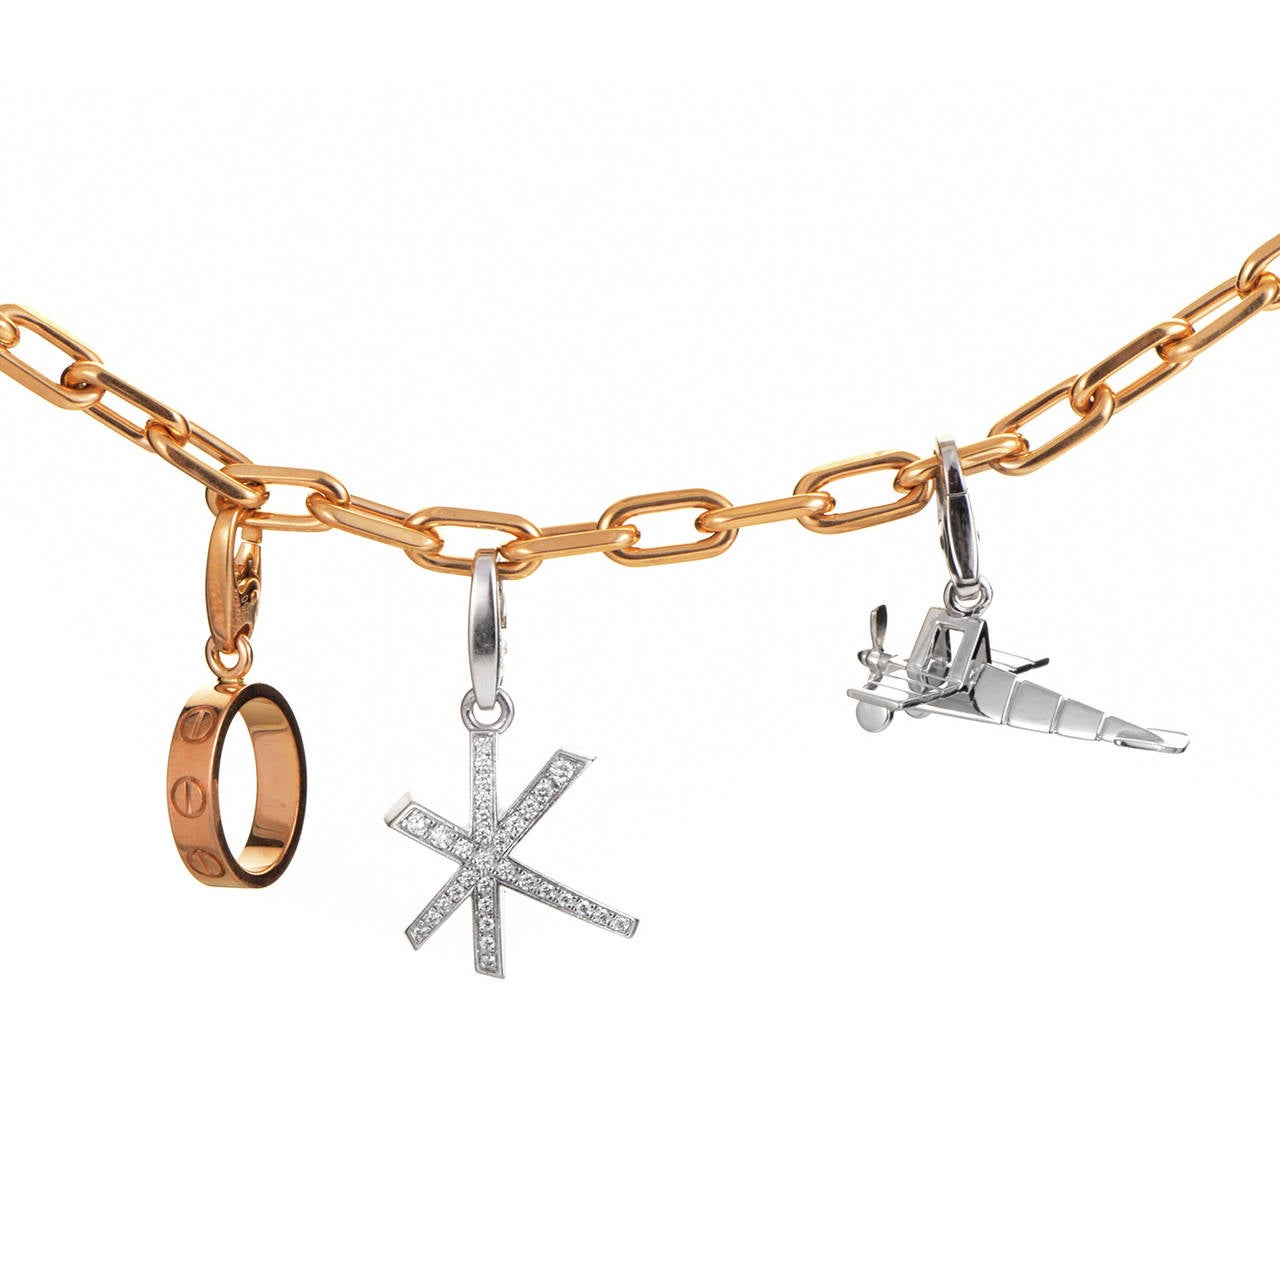 A gorgeous array of well-thought out charms makes this Cartier charm bracelet an absolute delight. The bracelet is comprised of 18K rose gold links and boasts a single rose gold charm. Two additional charms made of white gold and set with diamonds